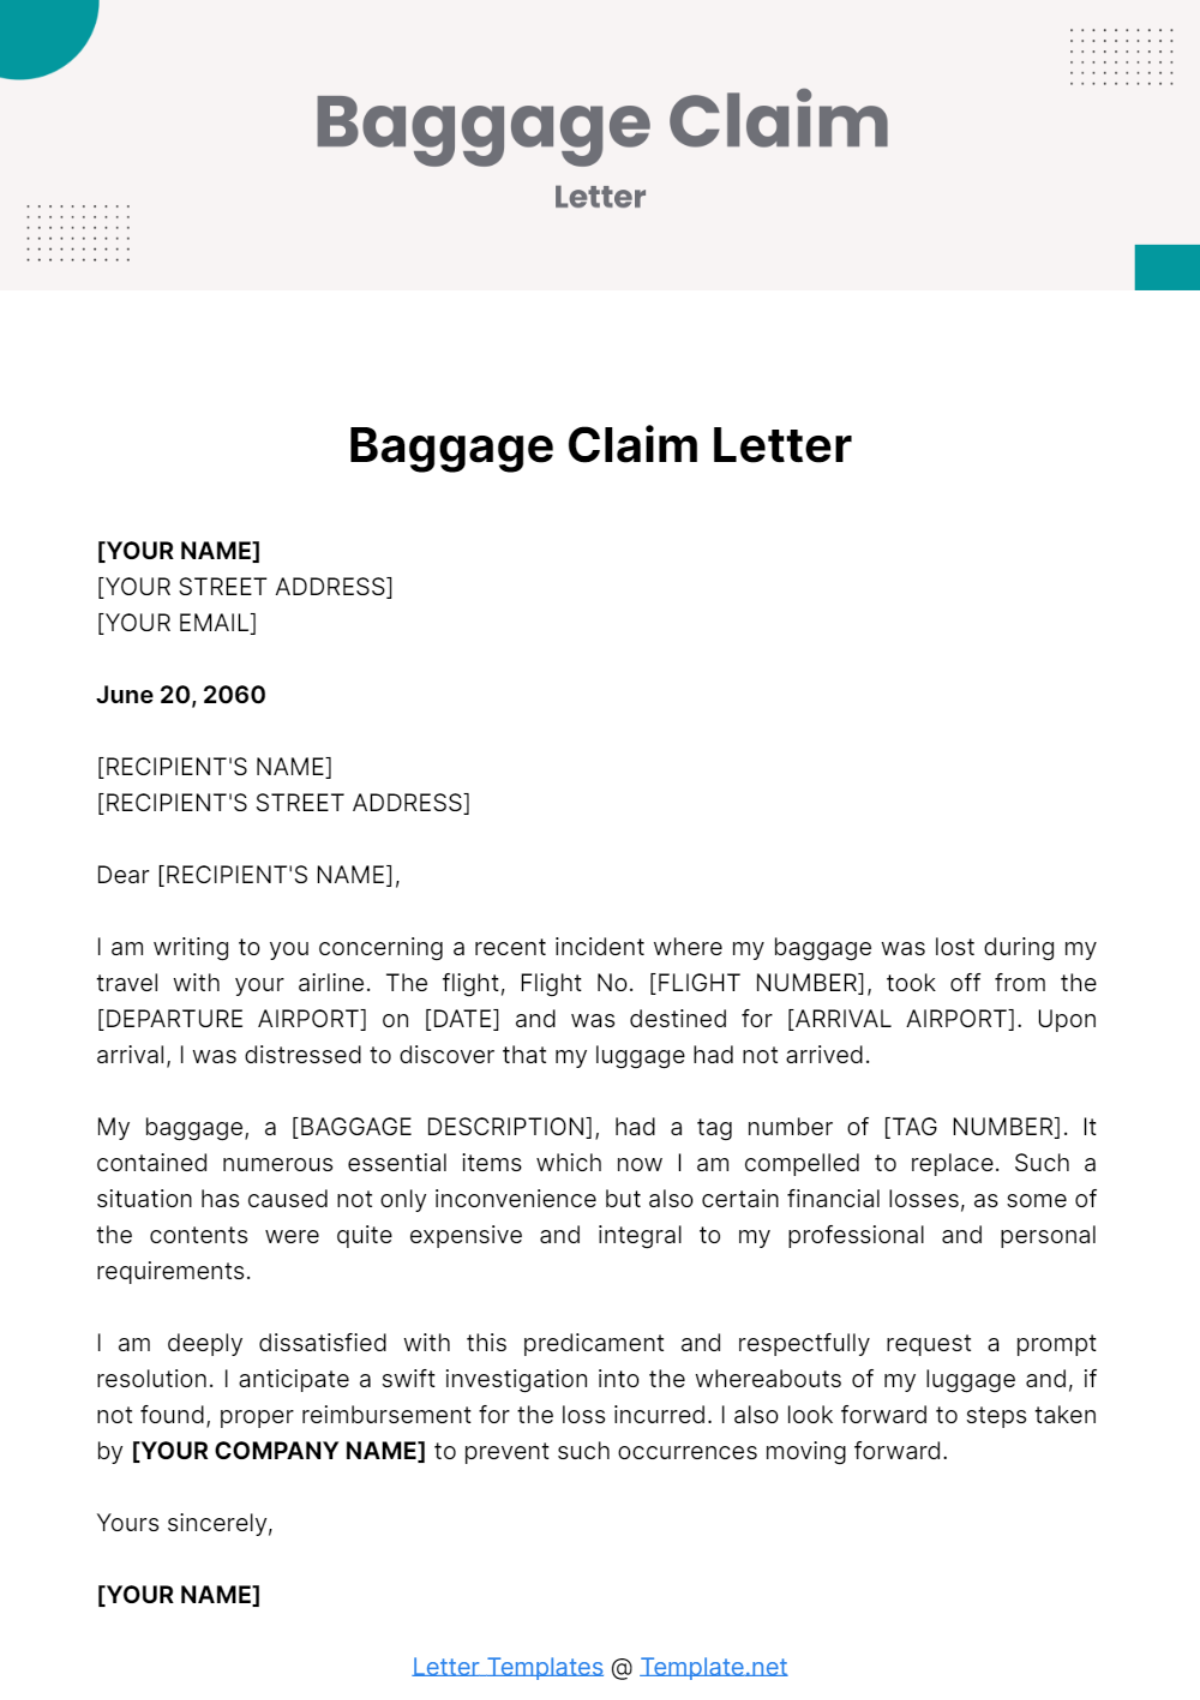 Baggage Claim Letter Template